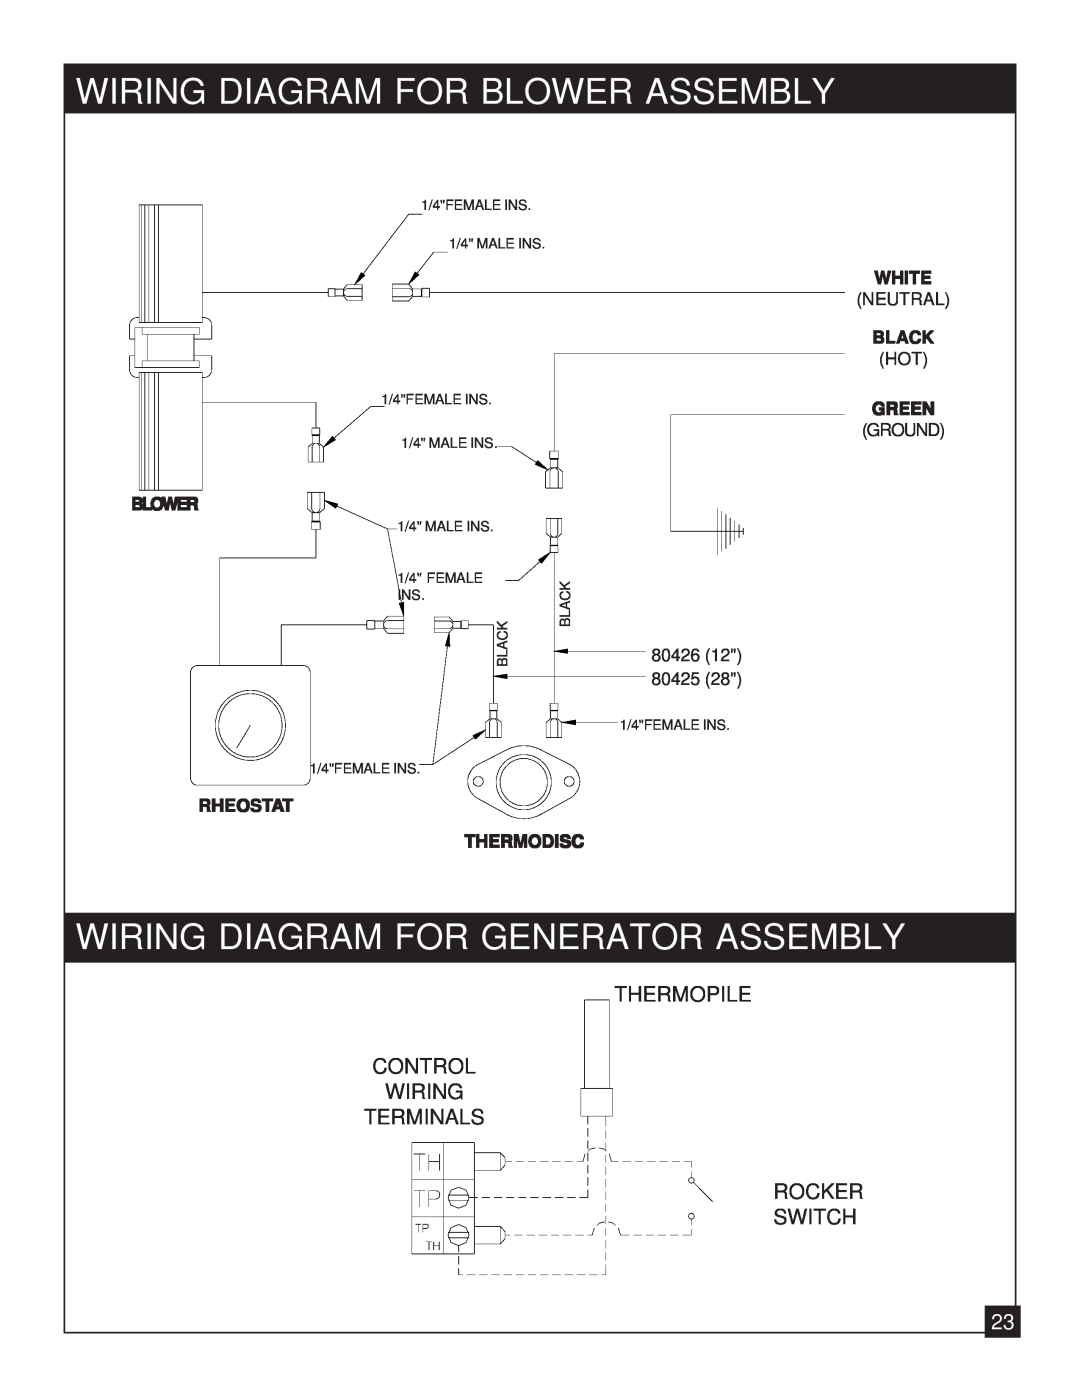 United States Stove 9947 Wiring Diagram For Blower Assembly, Wiring Diagram For Generator Assembly, White, Black, Green 